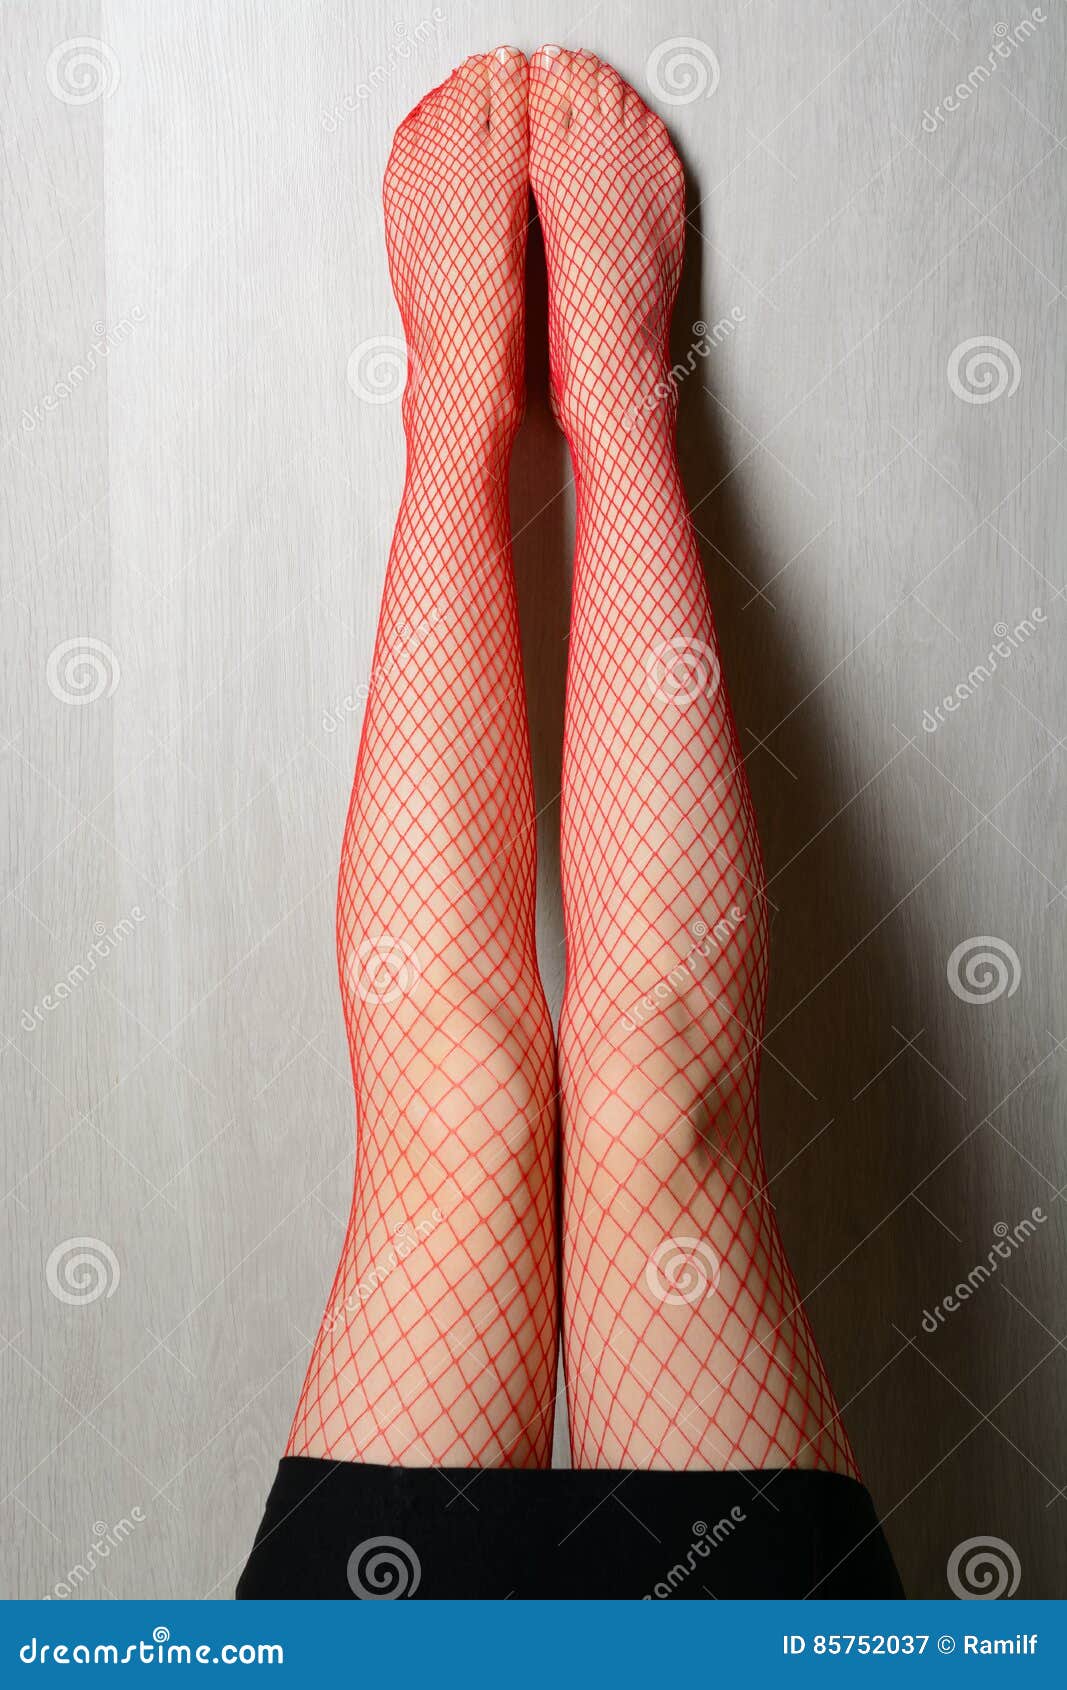 Female Feet in Red Stockings Stock Image - Image of beautiful